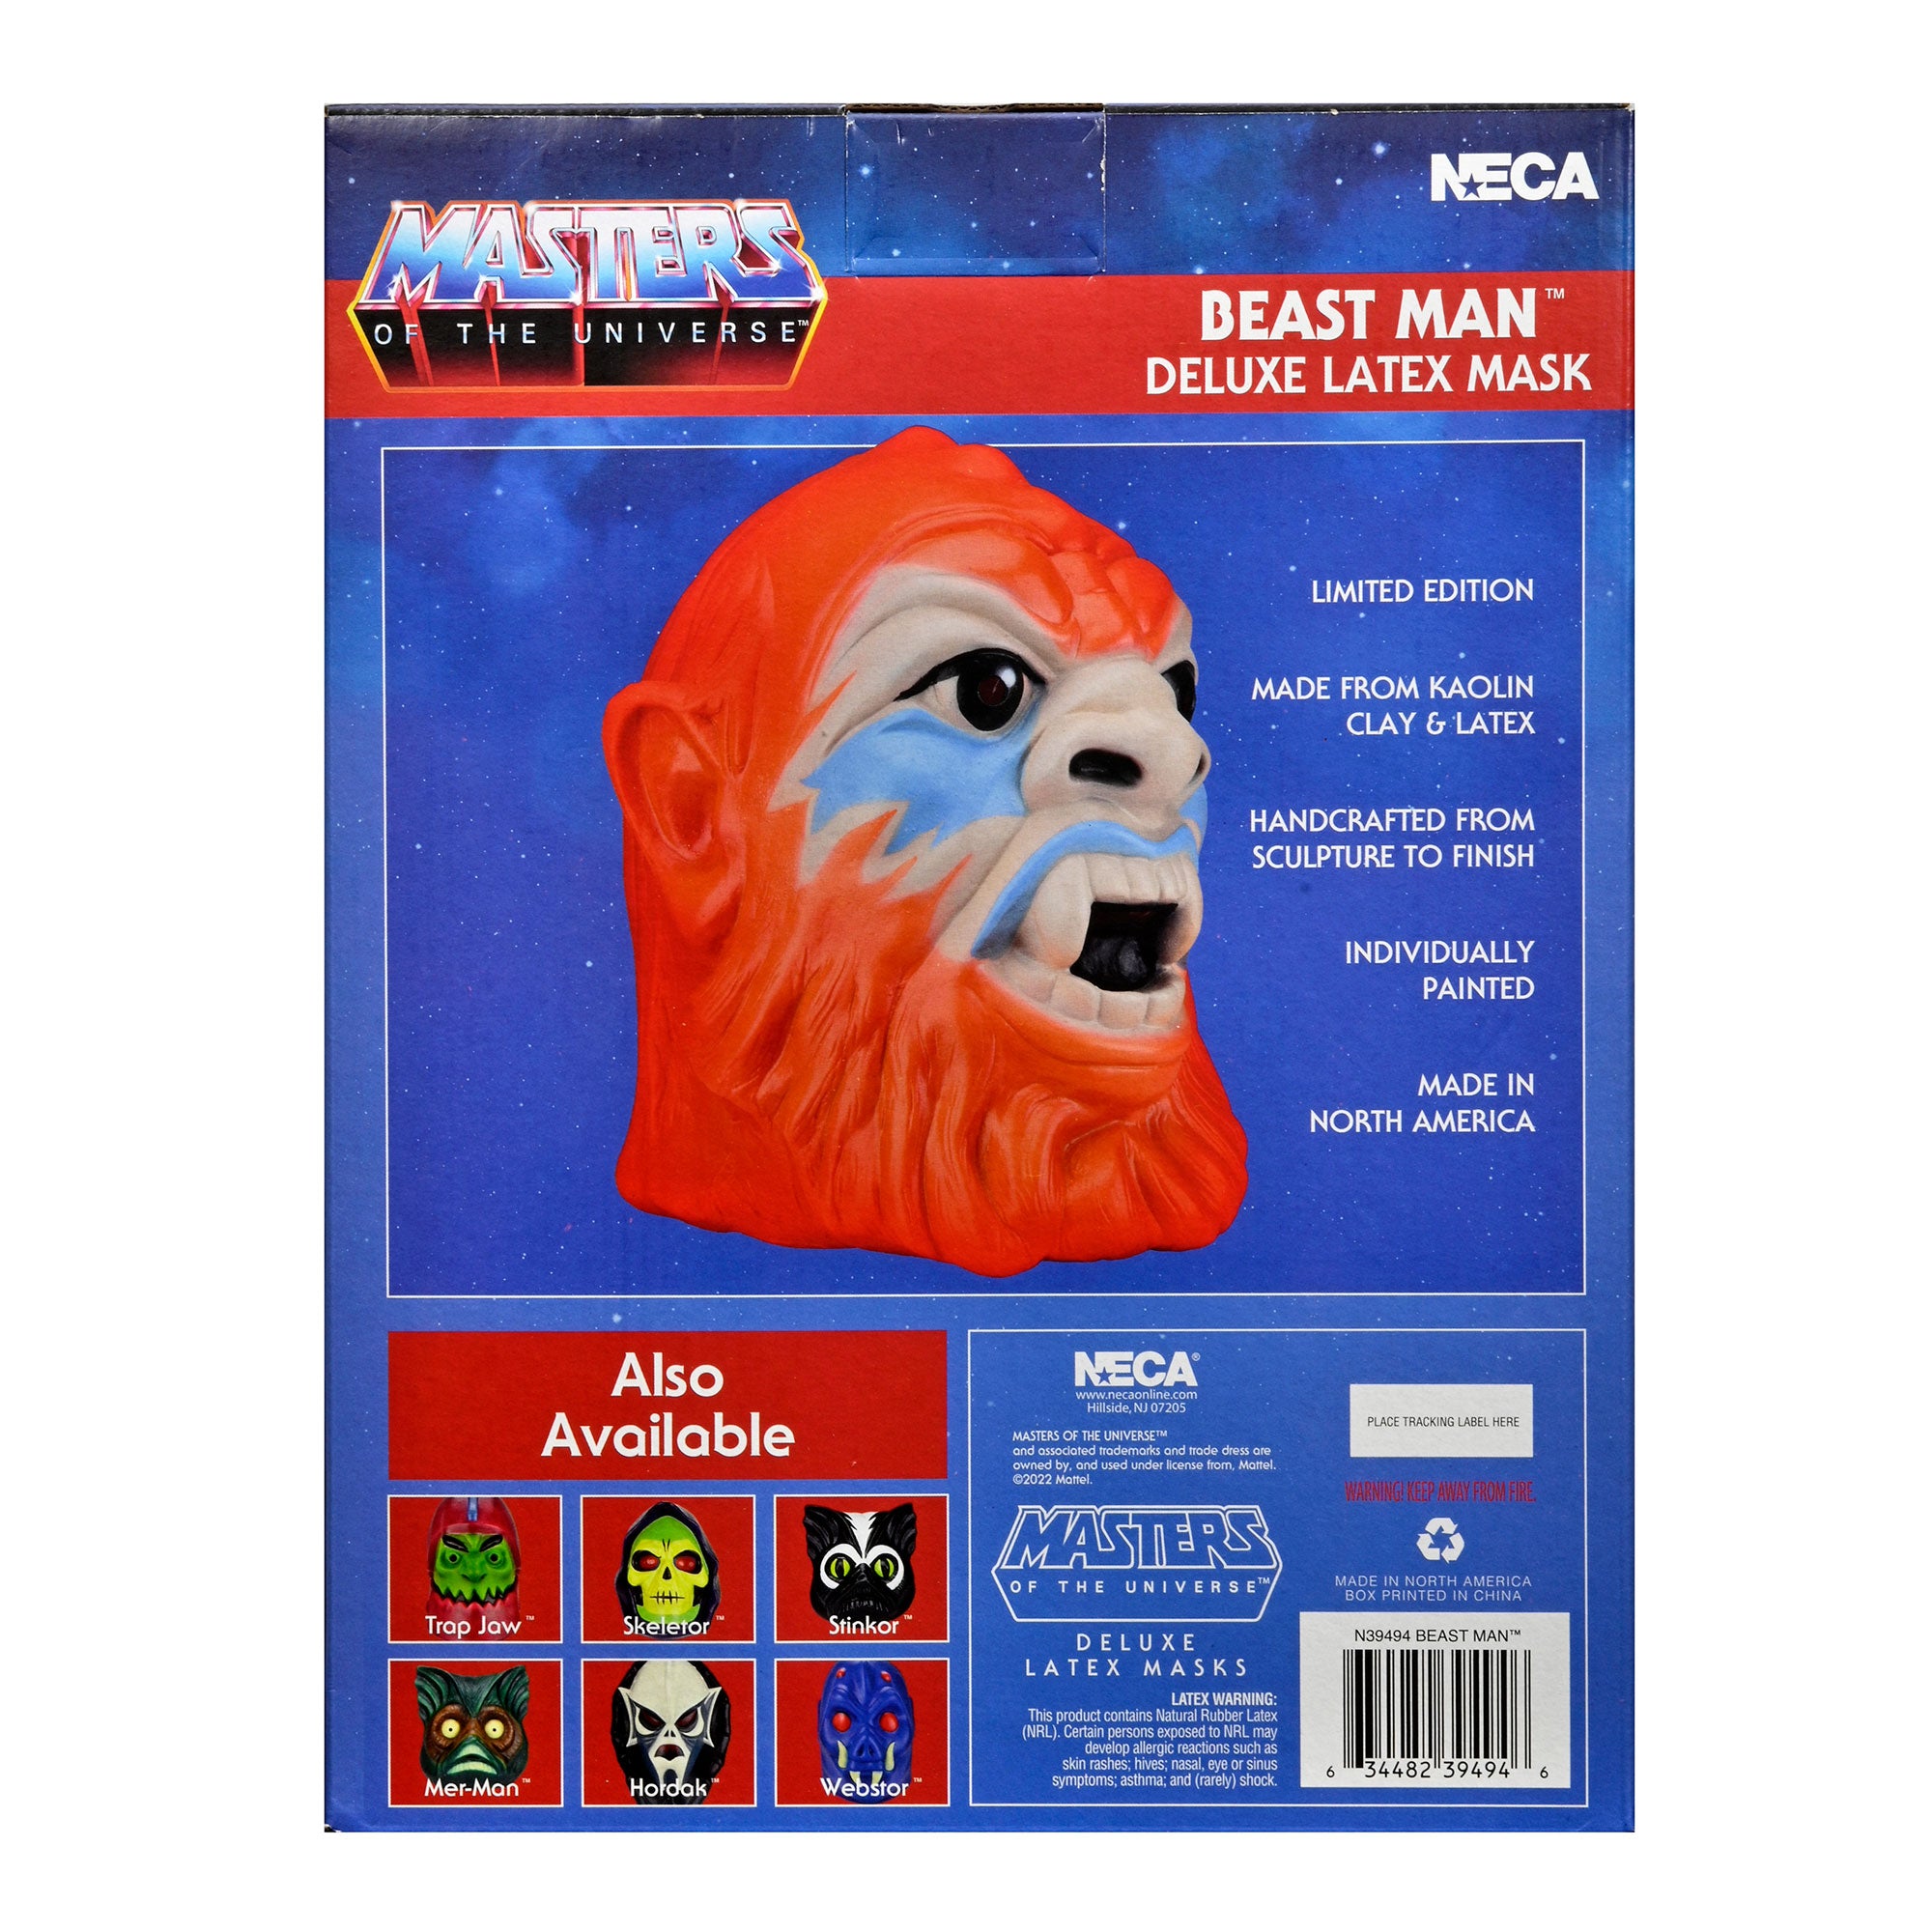 Masters of the Universe Beast Man Deluxe Latex Mask Packaging - Back of Box